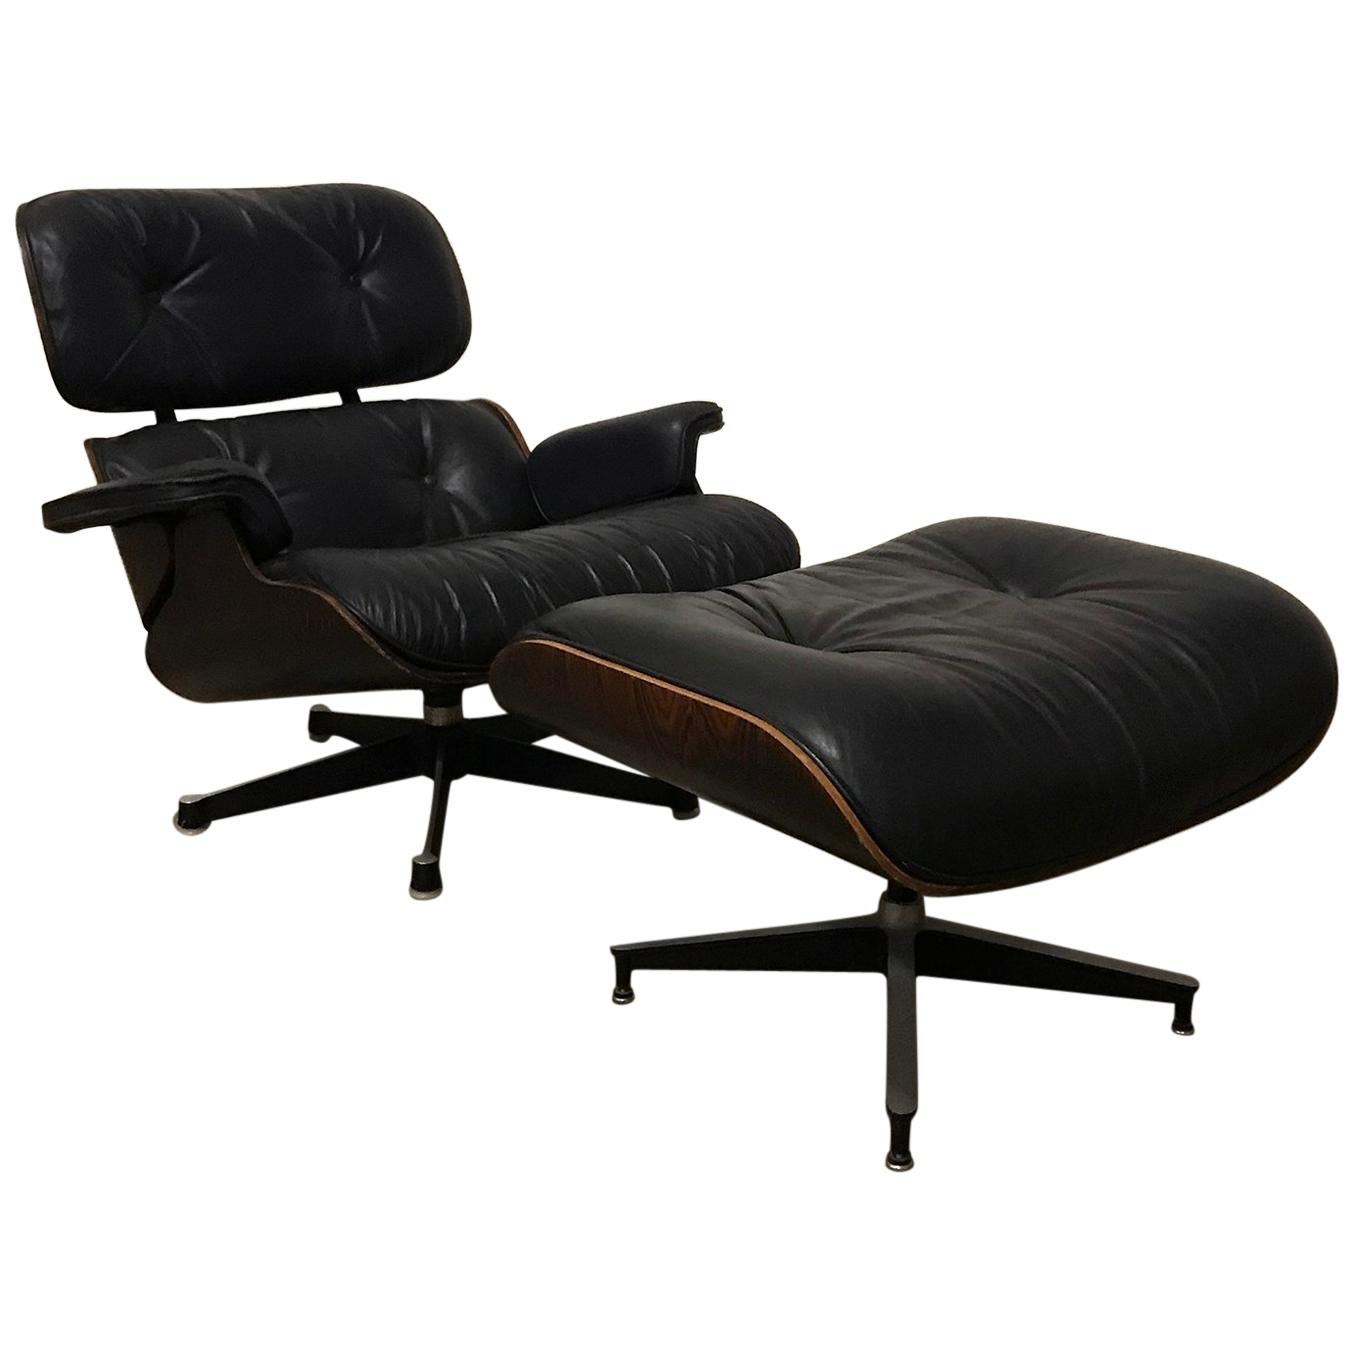 1956, Ray & Charles Eames, Miller, 1st Version Lounge Chair 1956, Ottoman 1966